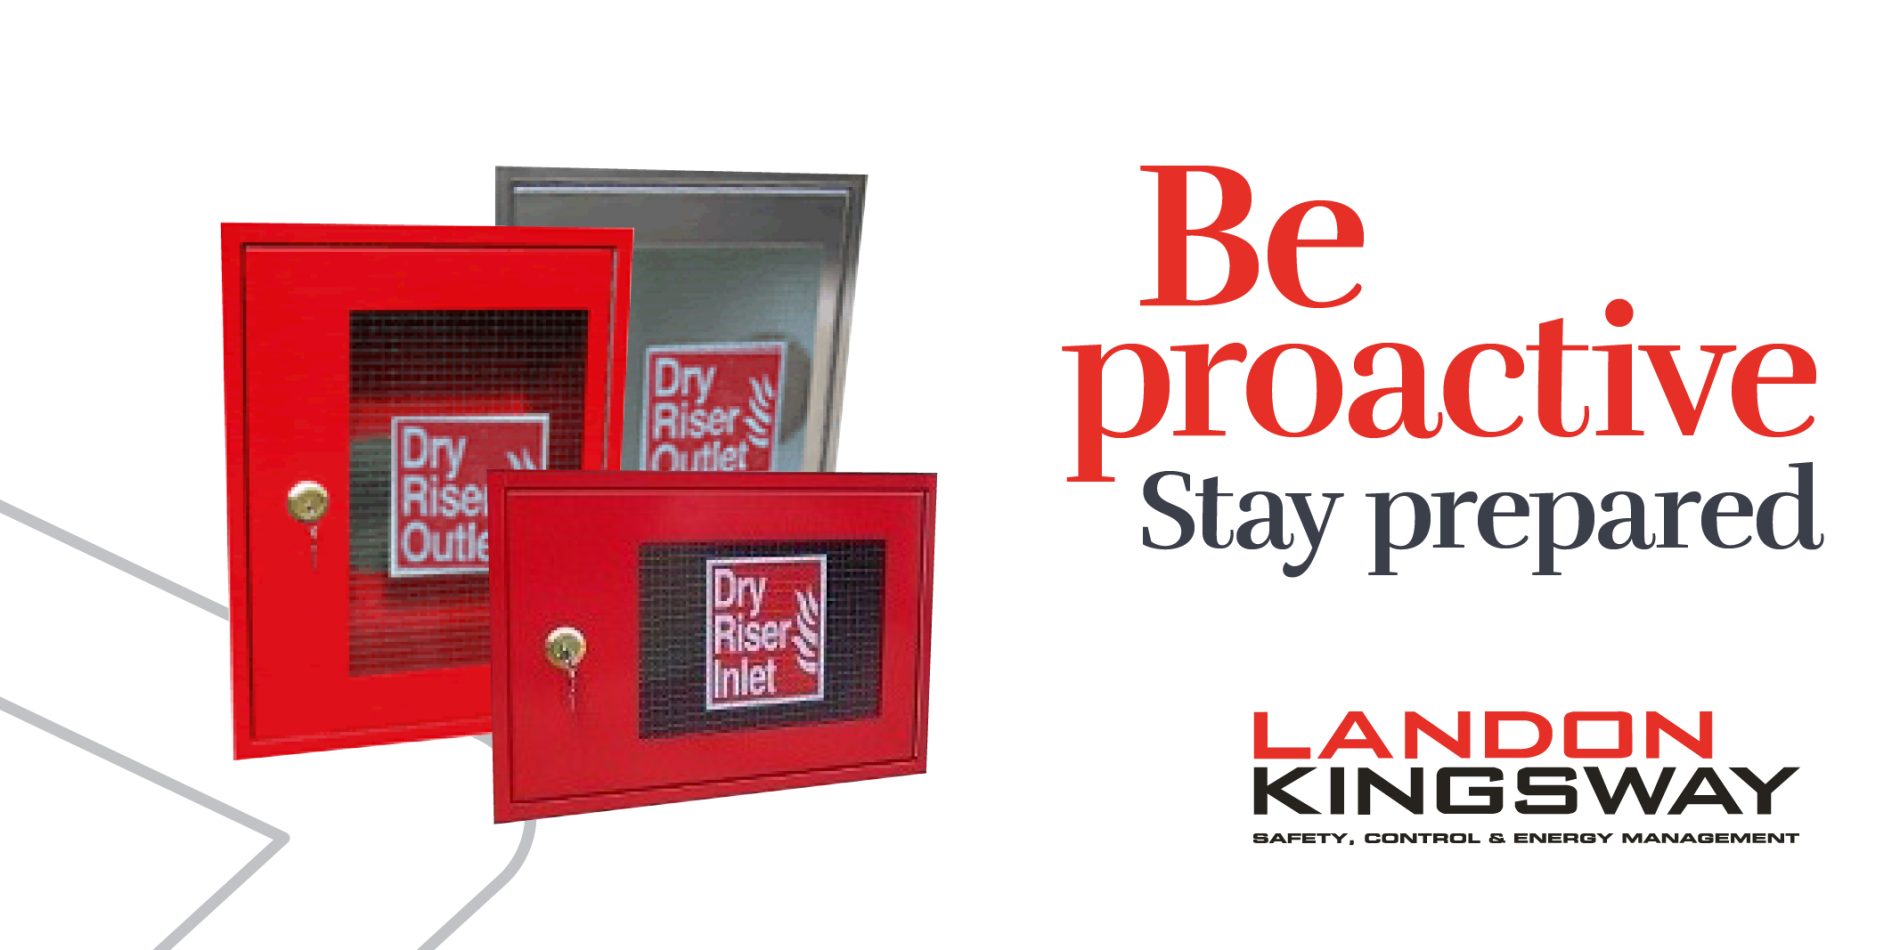 Safety comes first with Landon Kingsway Fire Cabinets Landon Kingsway